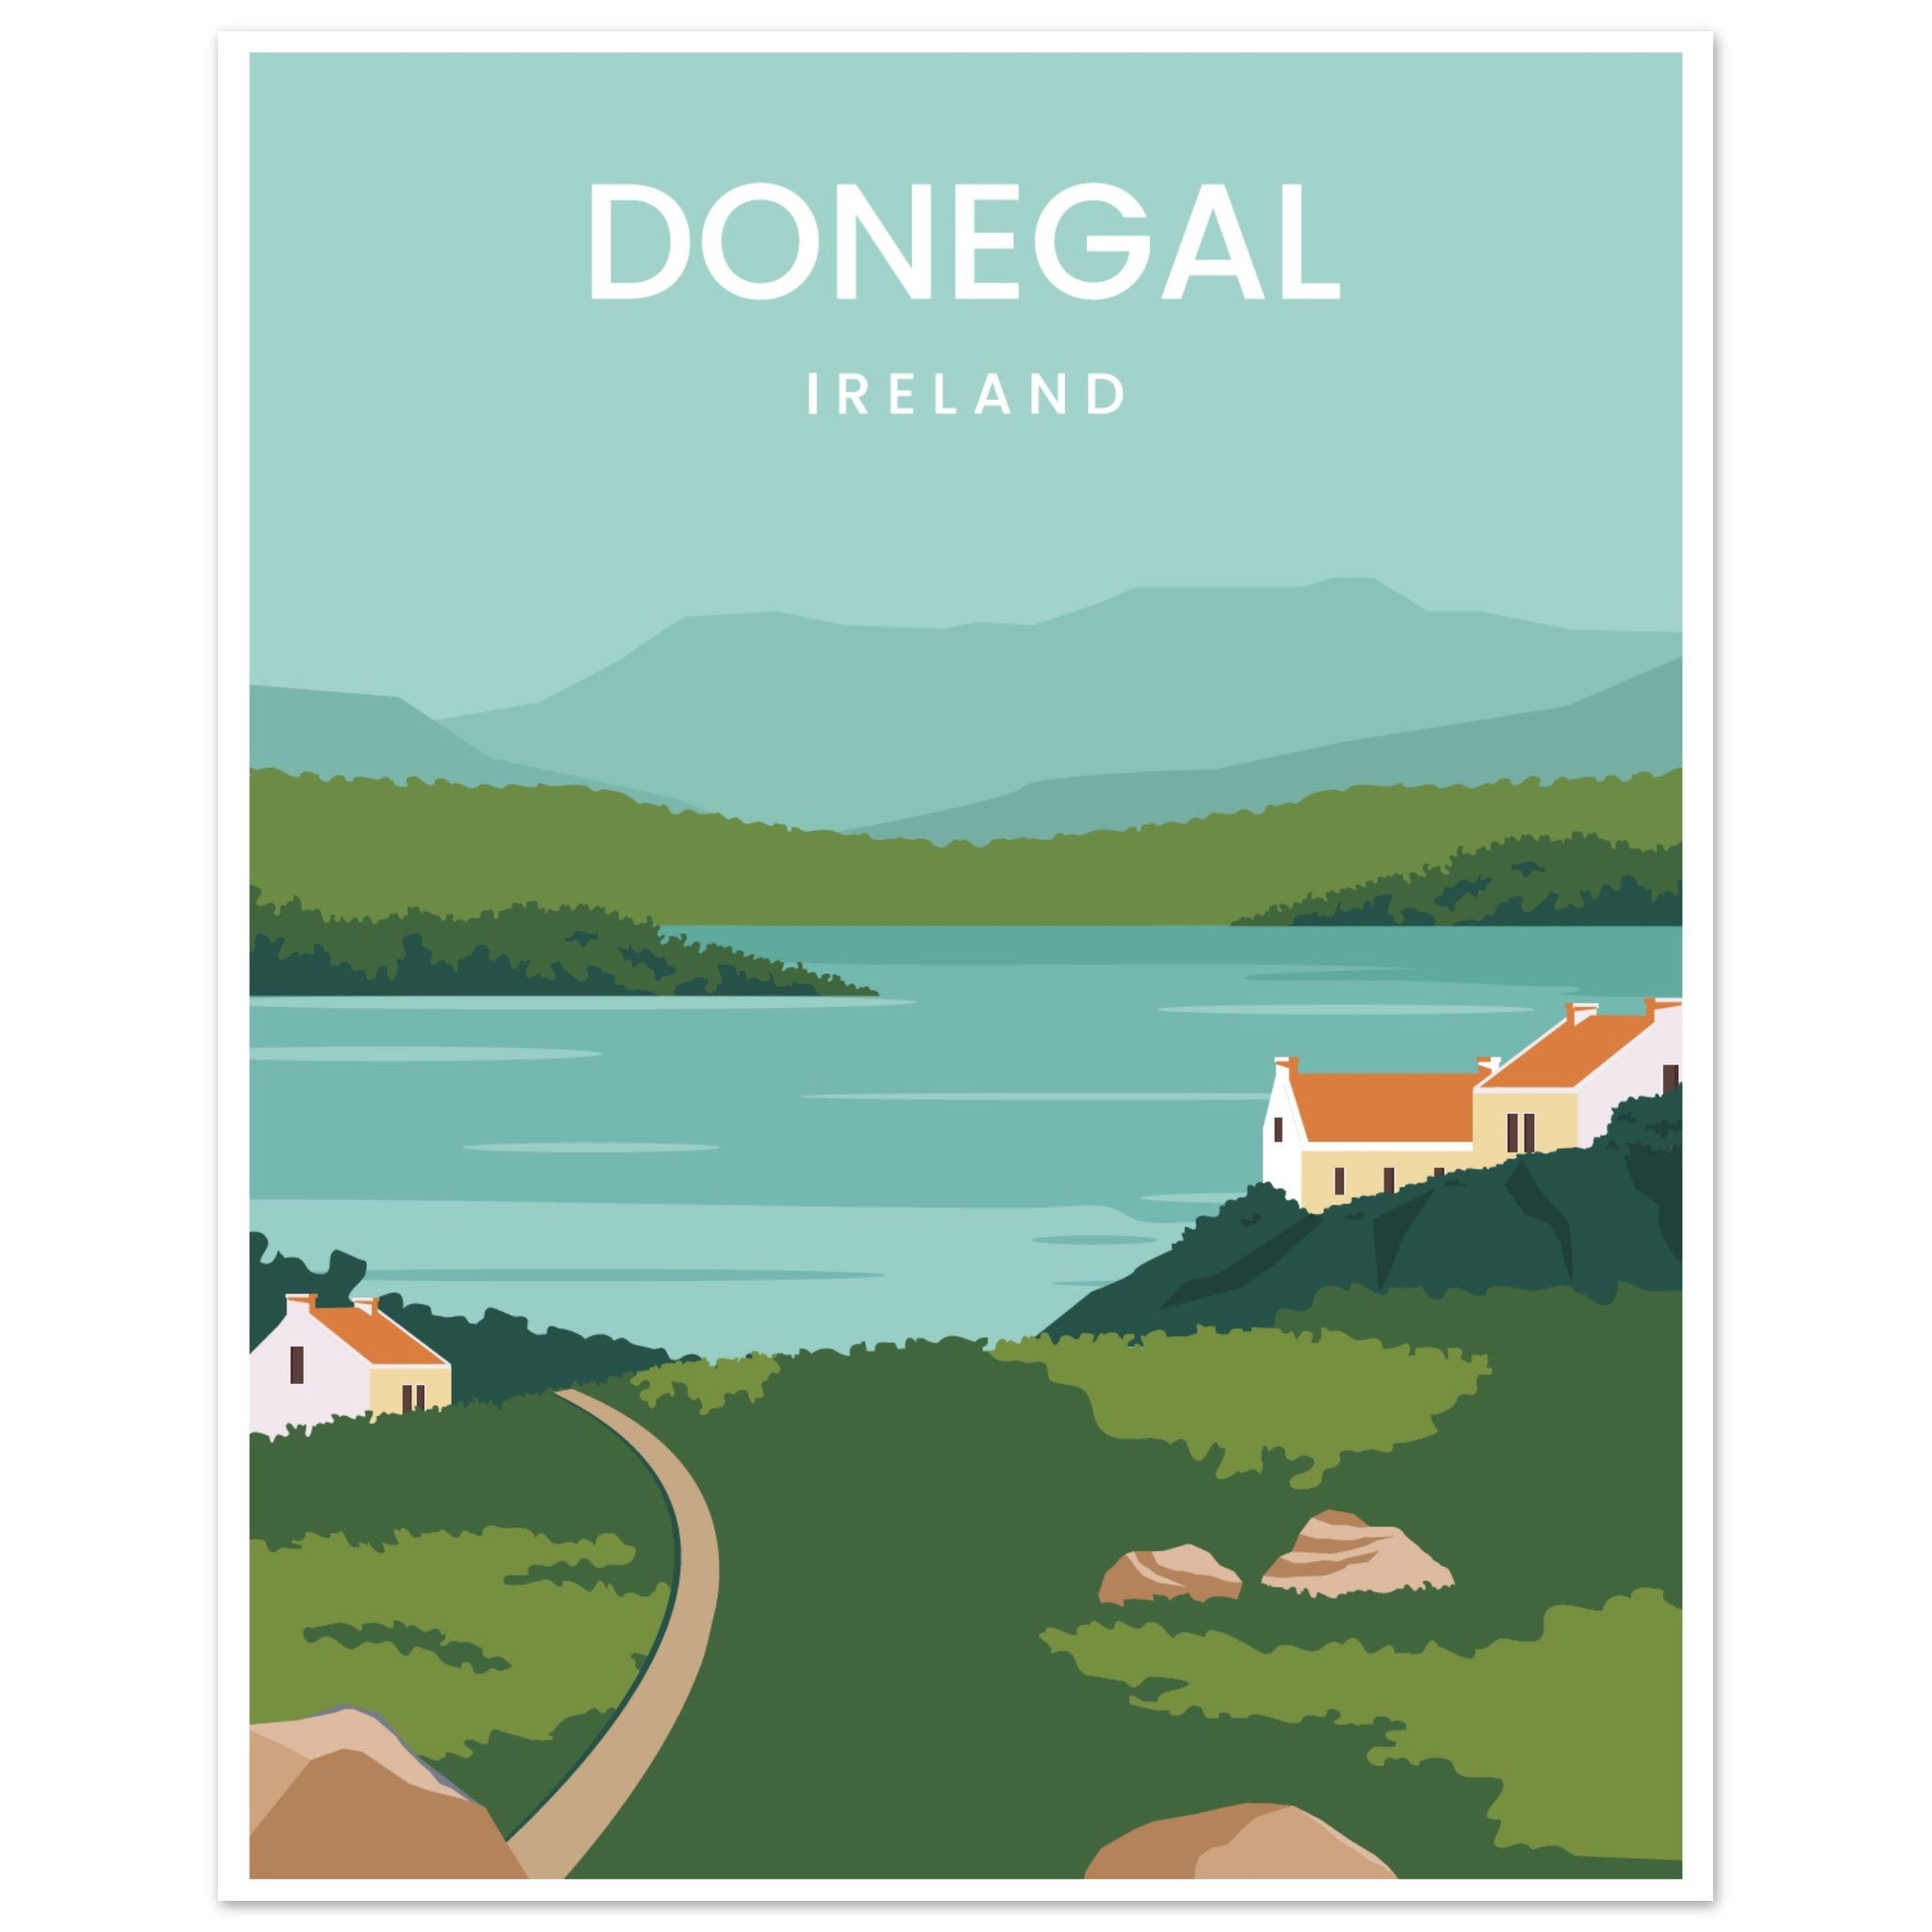 Minimalist Donegal, Ireland travel poster art print, showcasing serene landscapes and iconic Irish elements in a stylish, simplified design, ideal for wall decor.